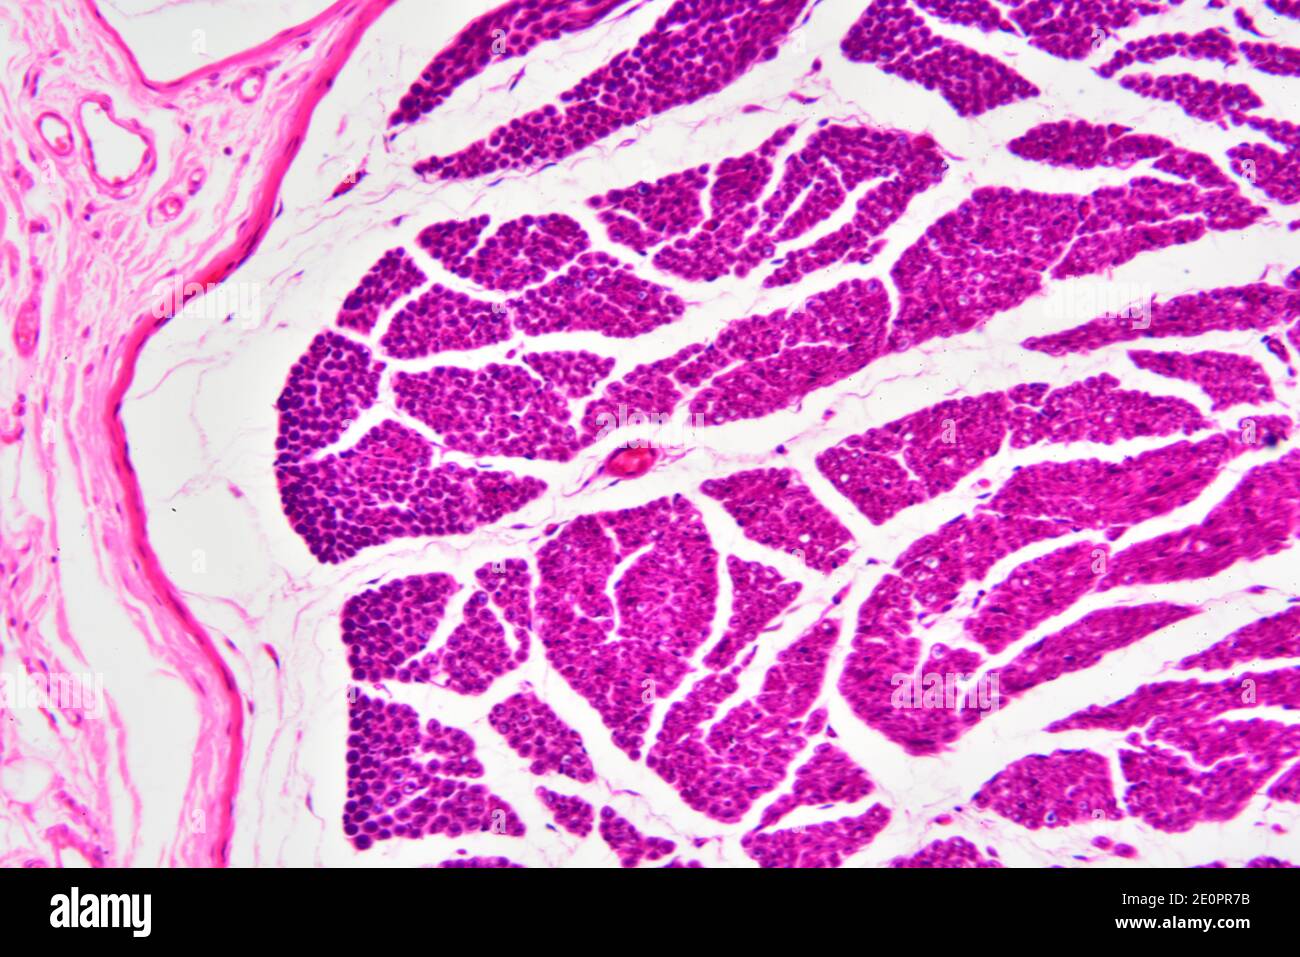 Human nerve fibers with perineurium. X125 at 10 cm wide. Stock Photo